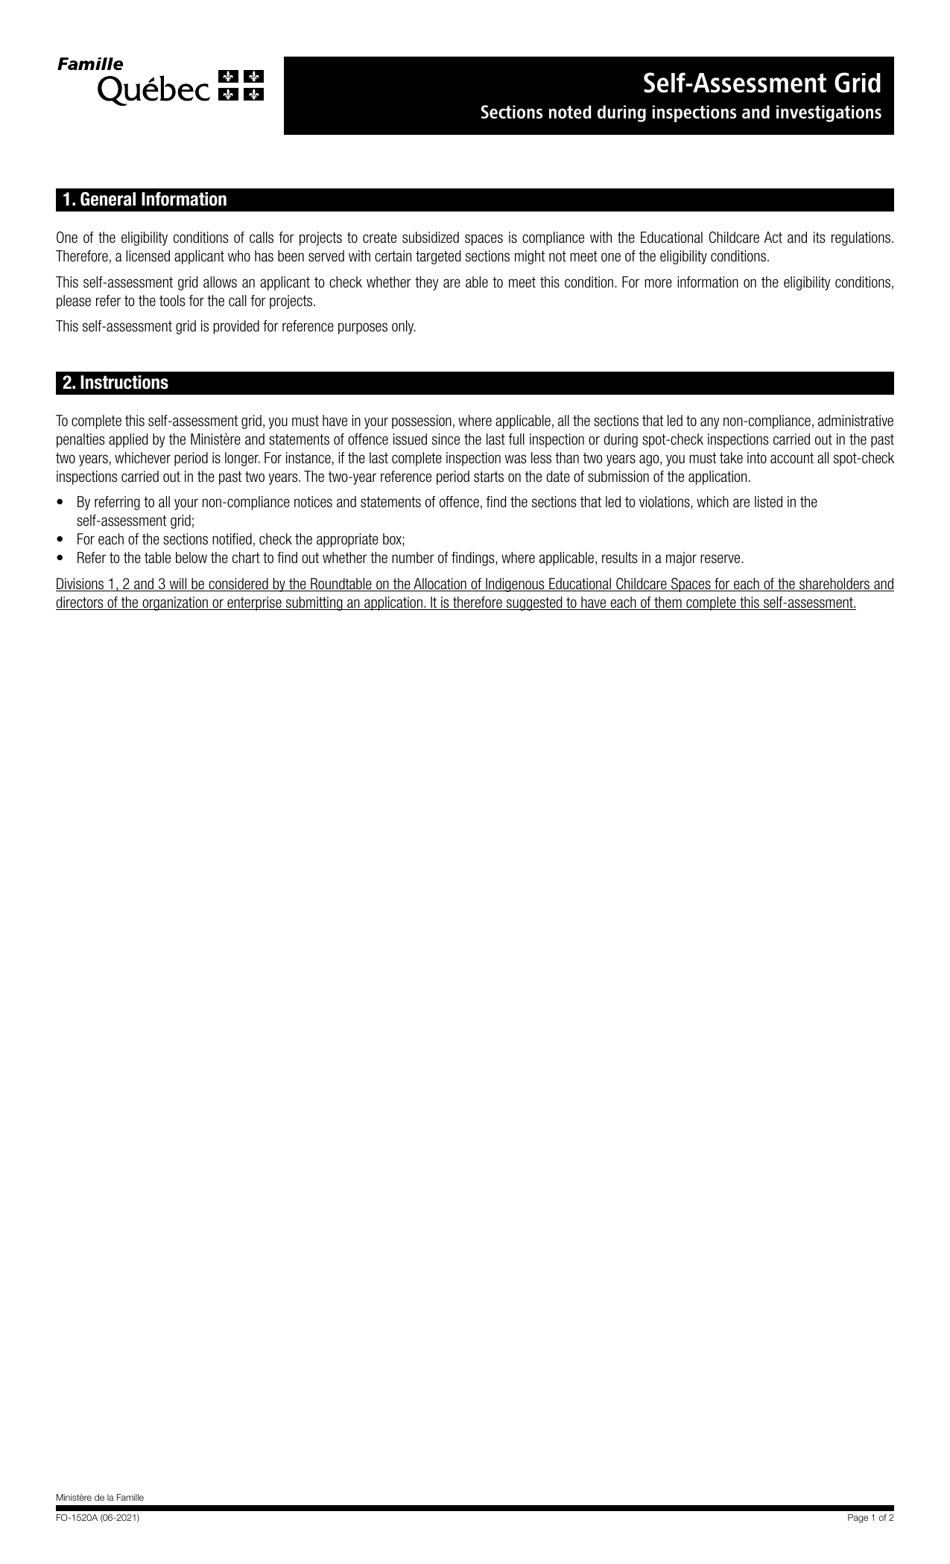 Form FO-1520A Self-assessment Grid - Sections Noted During Inspections and Investigations - Quebec, Canada, Page 1